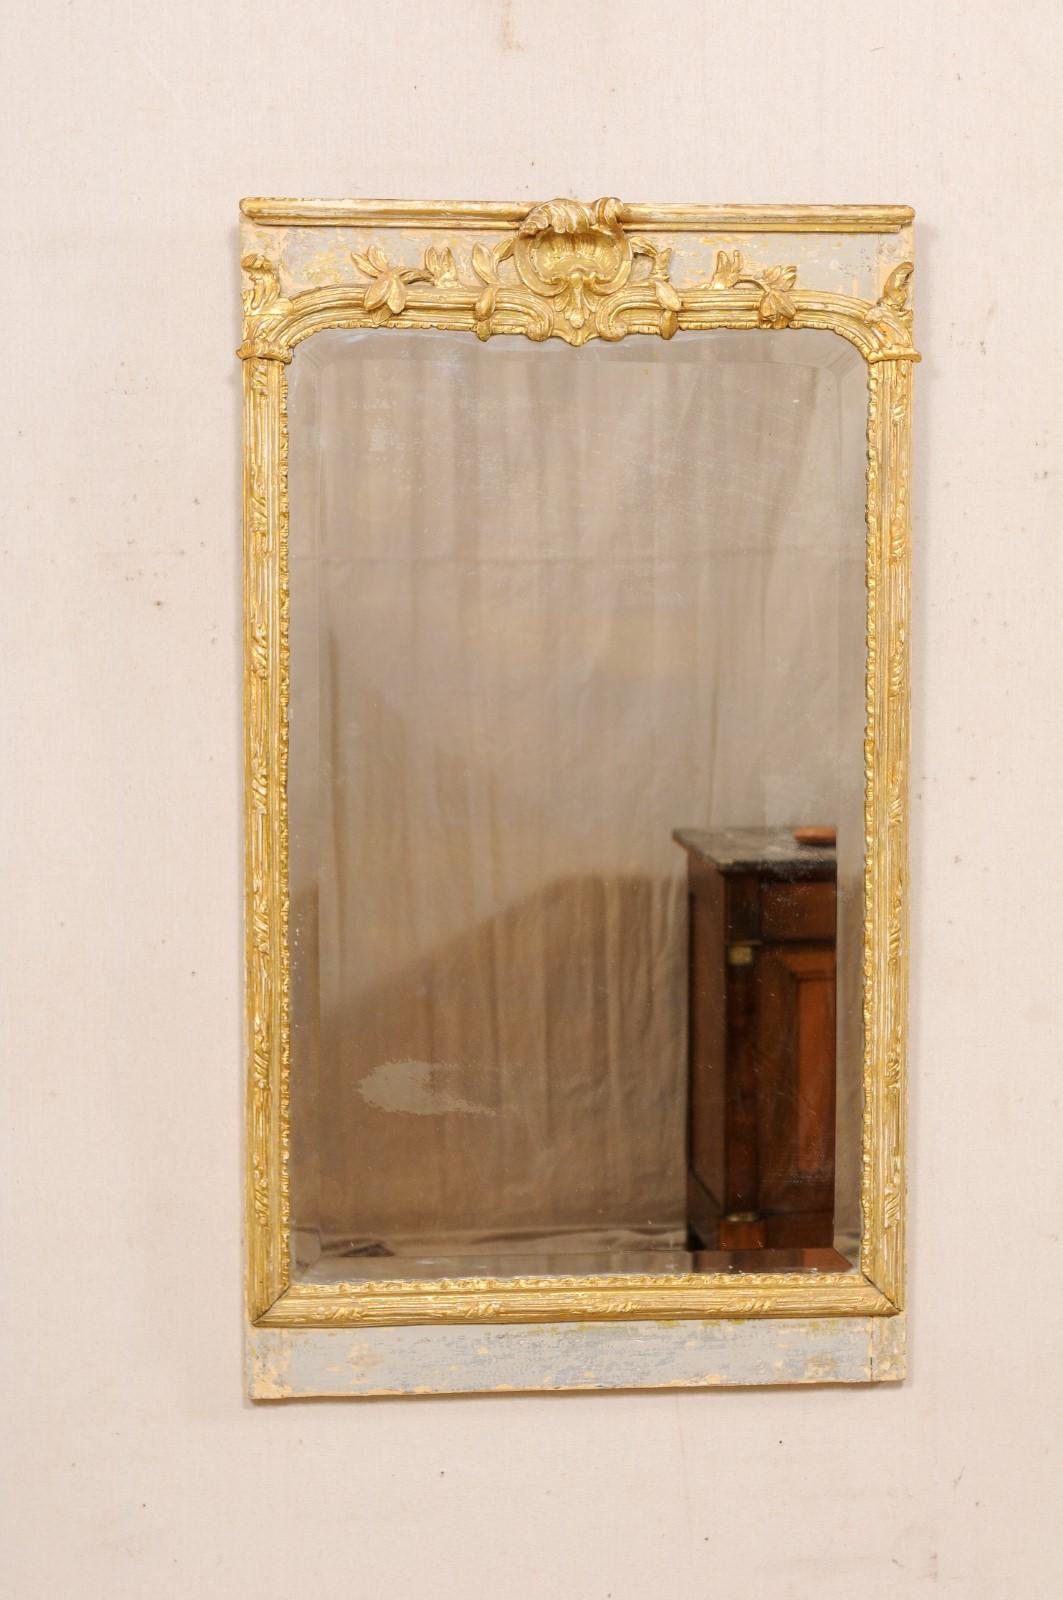 A French rectangular mirror, with carved and painted wood surround, from the 19th century. This antique mirror from France has a rectangular-shaped mirrored glass center, with nicely carved wood frame featuring a curled acanthus leaf and shell at